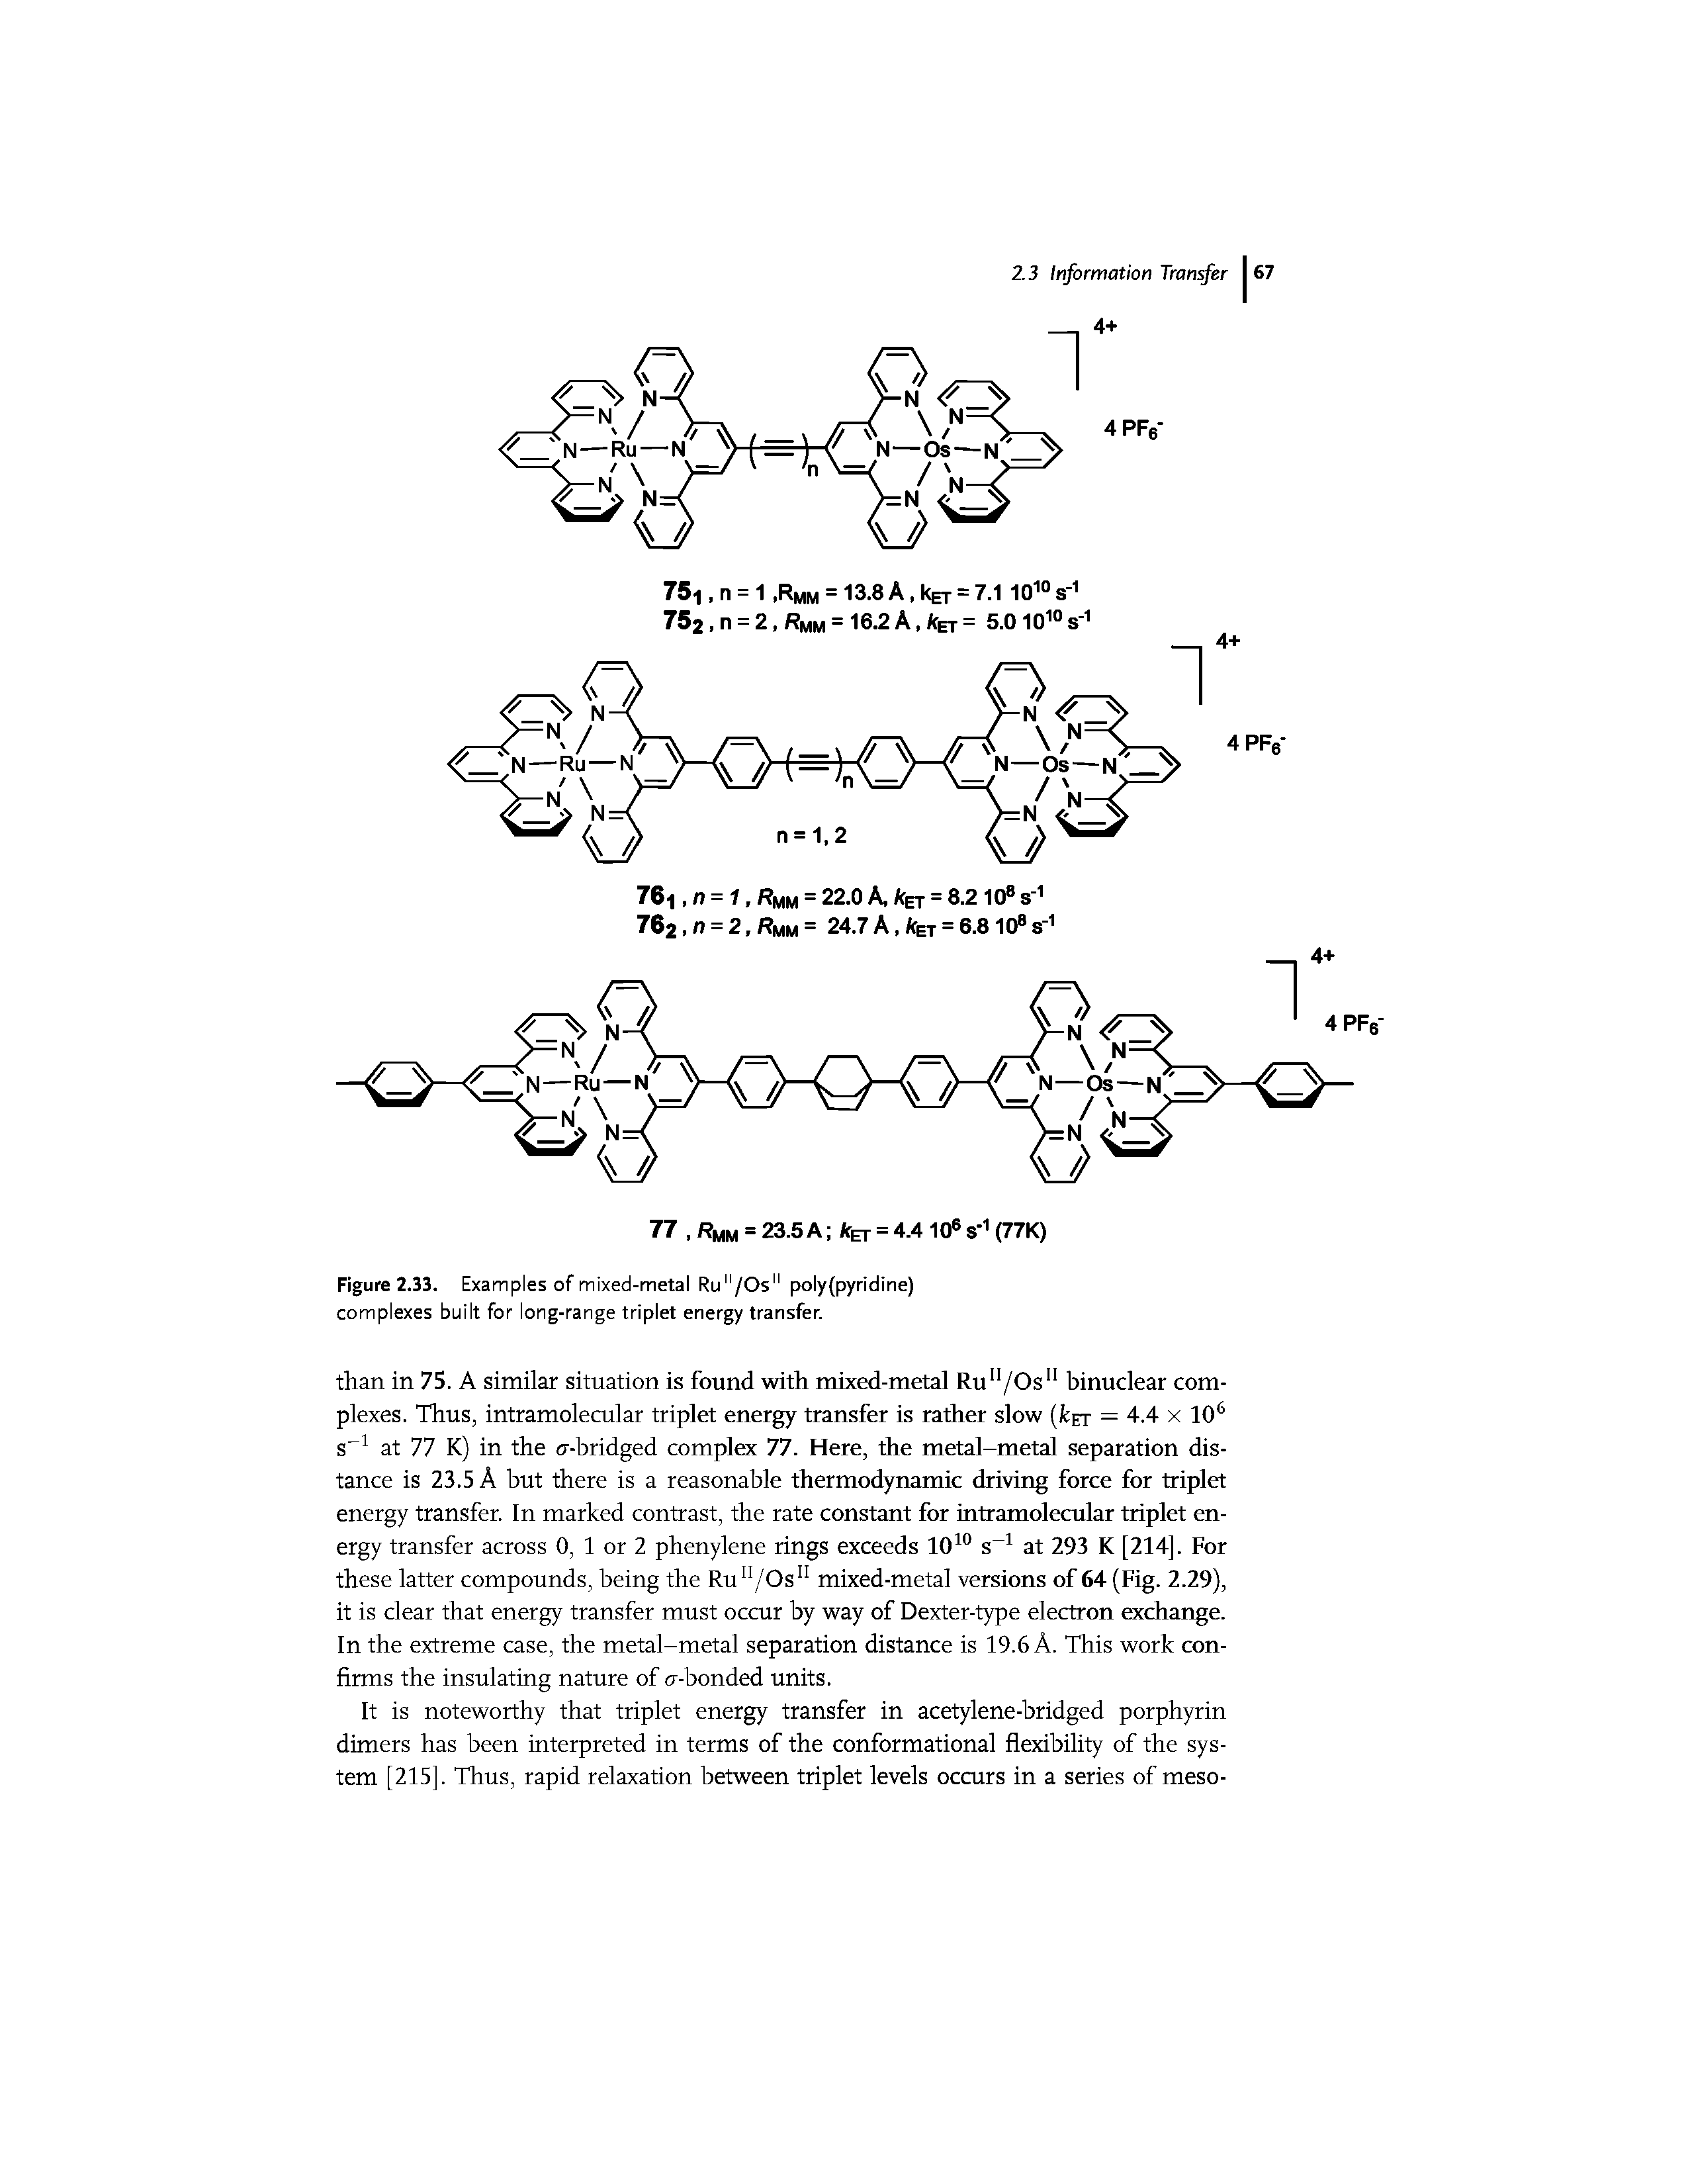 Figure 2.33. Examples of mixed-metal Ru"/Os" poly(pyridine) complexes built for long-range triplet energy transfer.